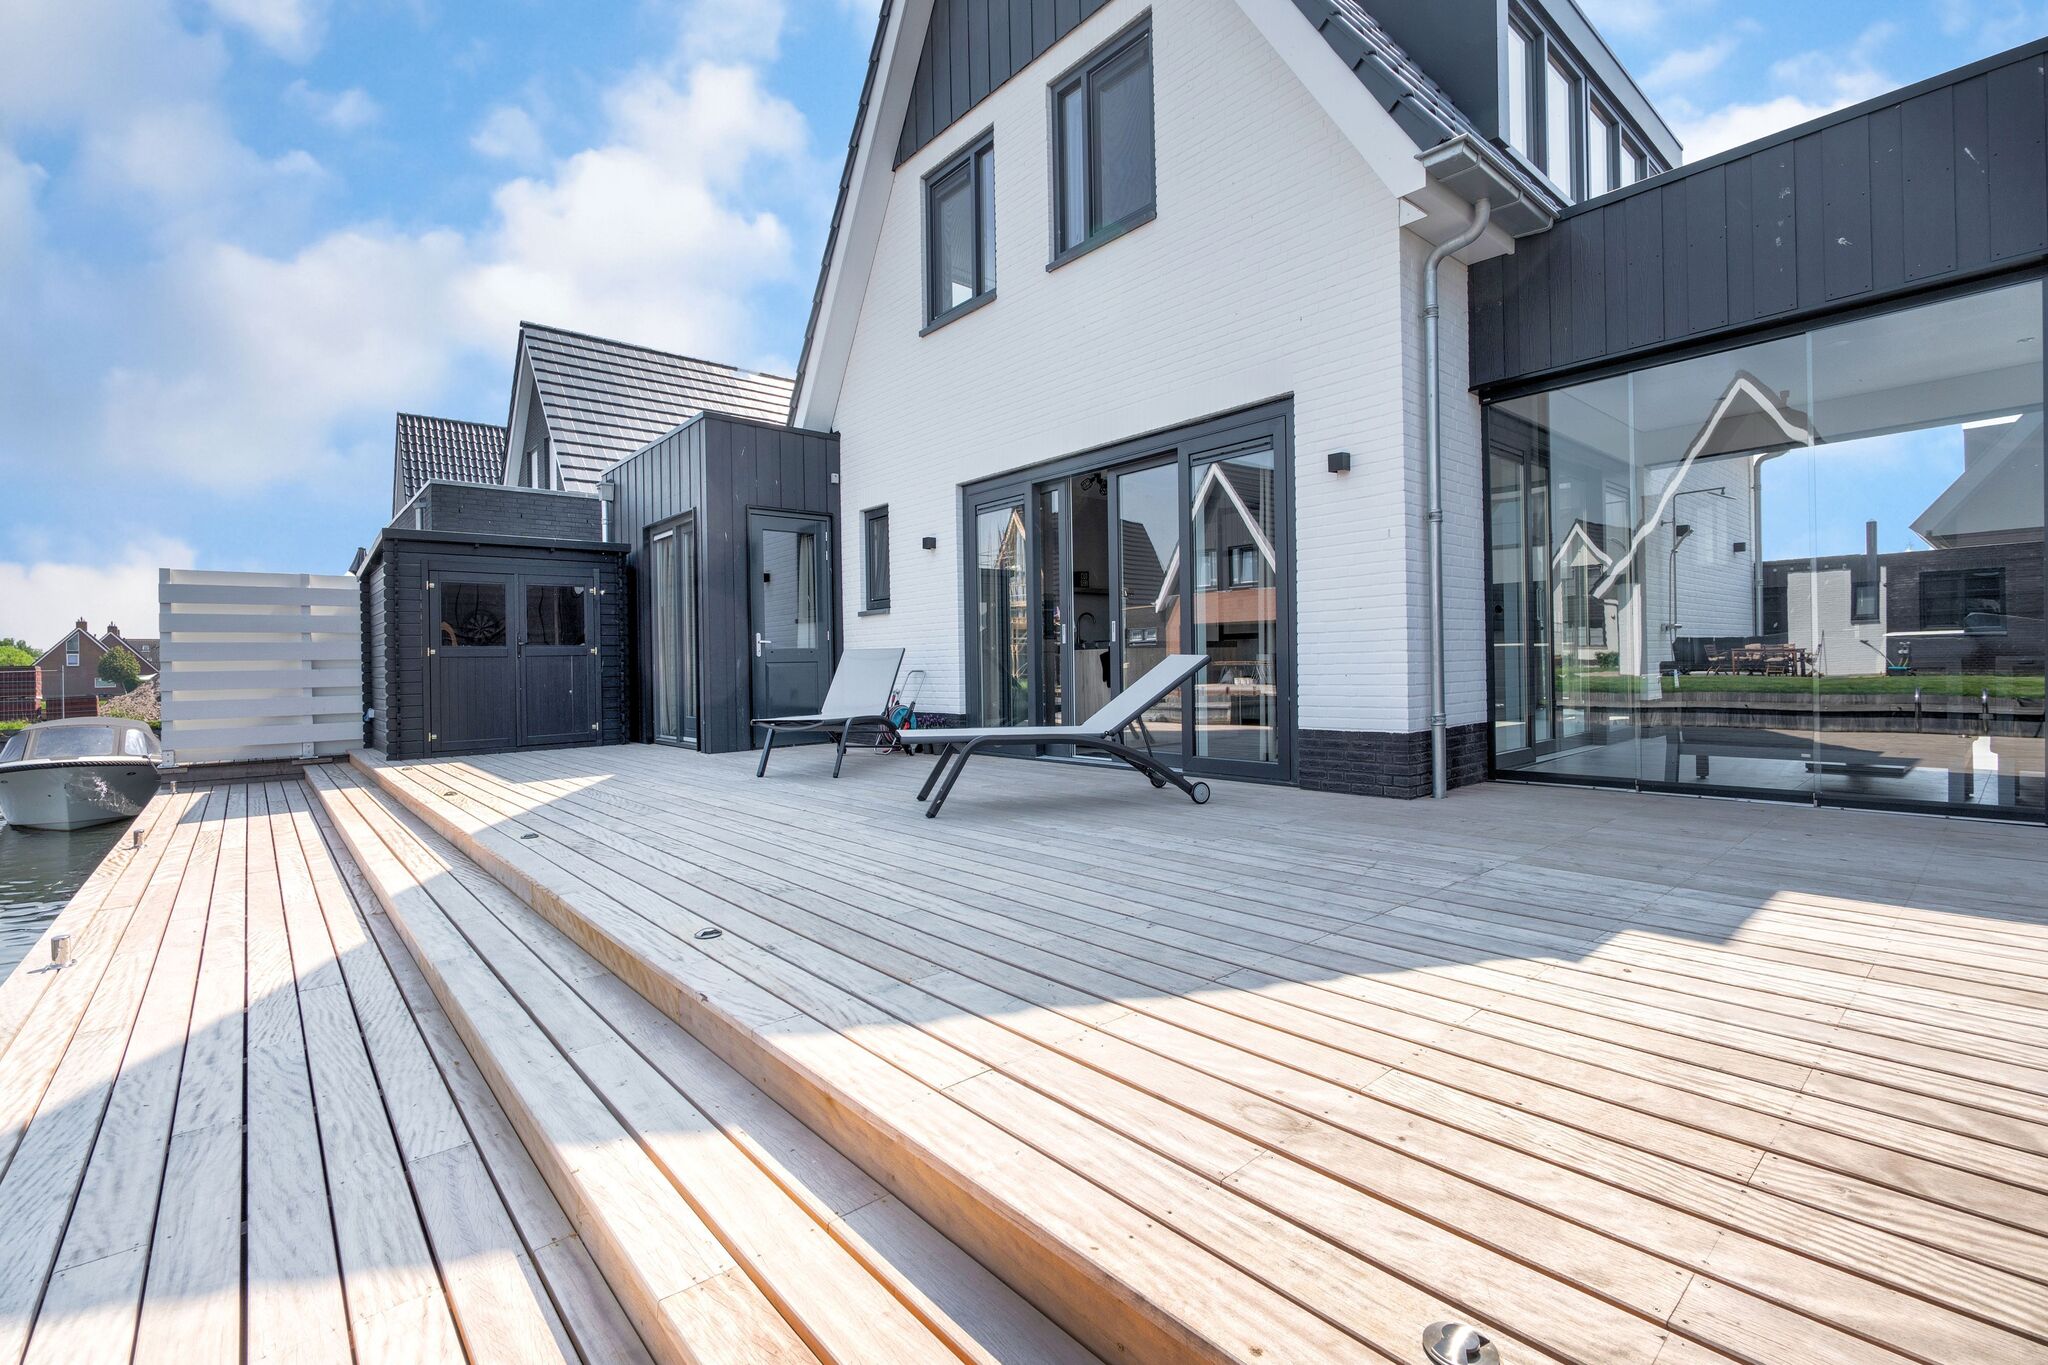 New holiday home in Stavoren with private jetty and wellness